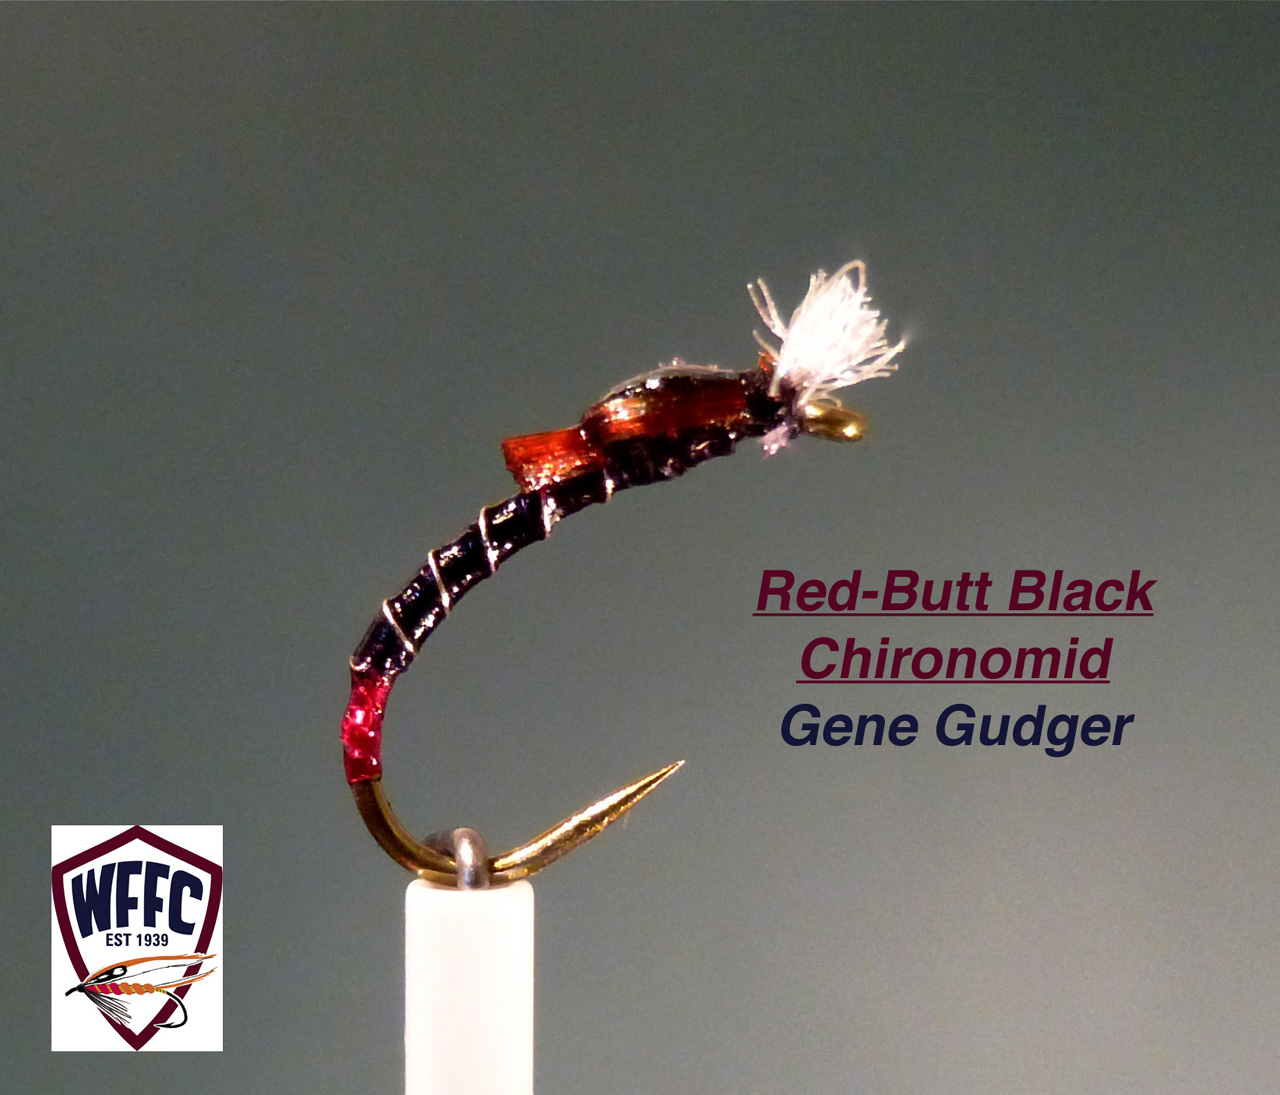 Red-Butt Black Chironomid